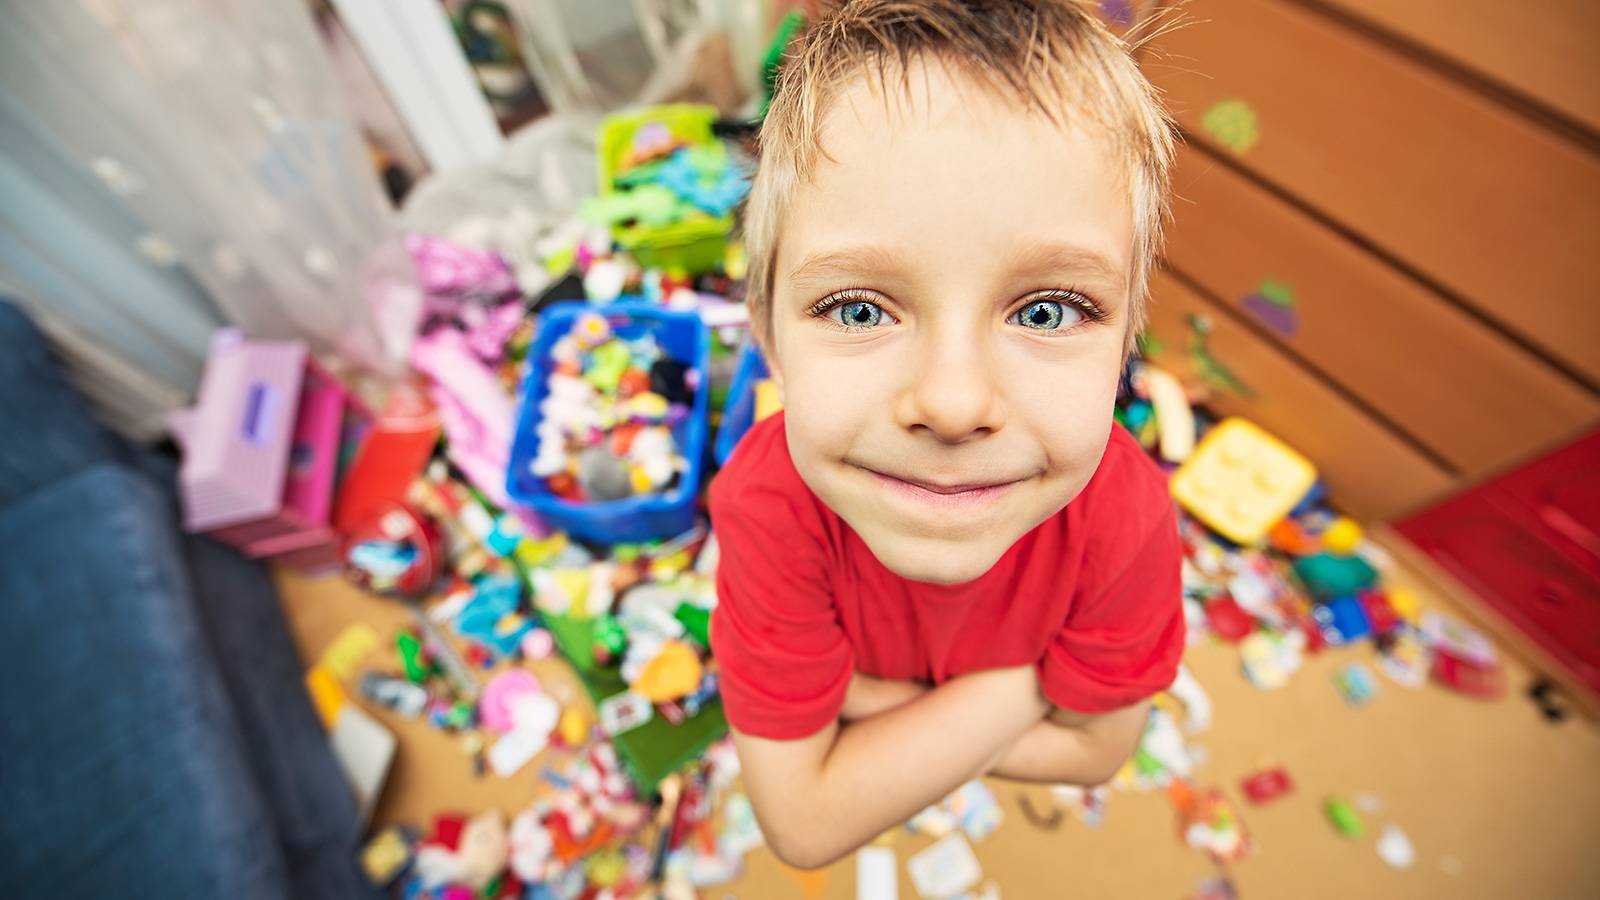 Kids-10-tips-to-get-junior-to-clean-up-after-themselves-1